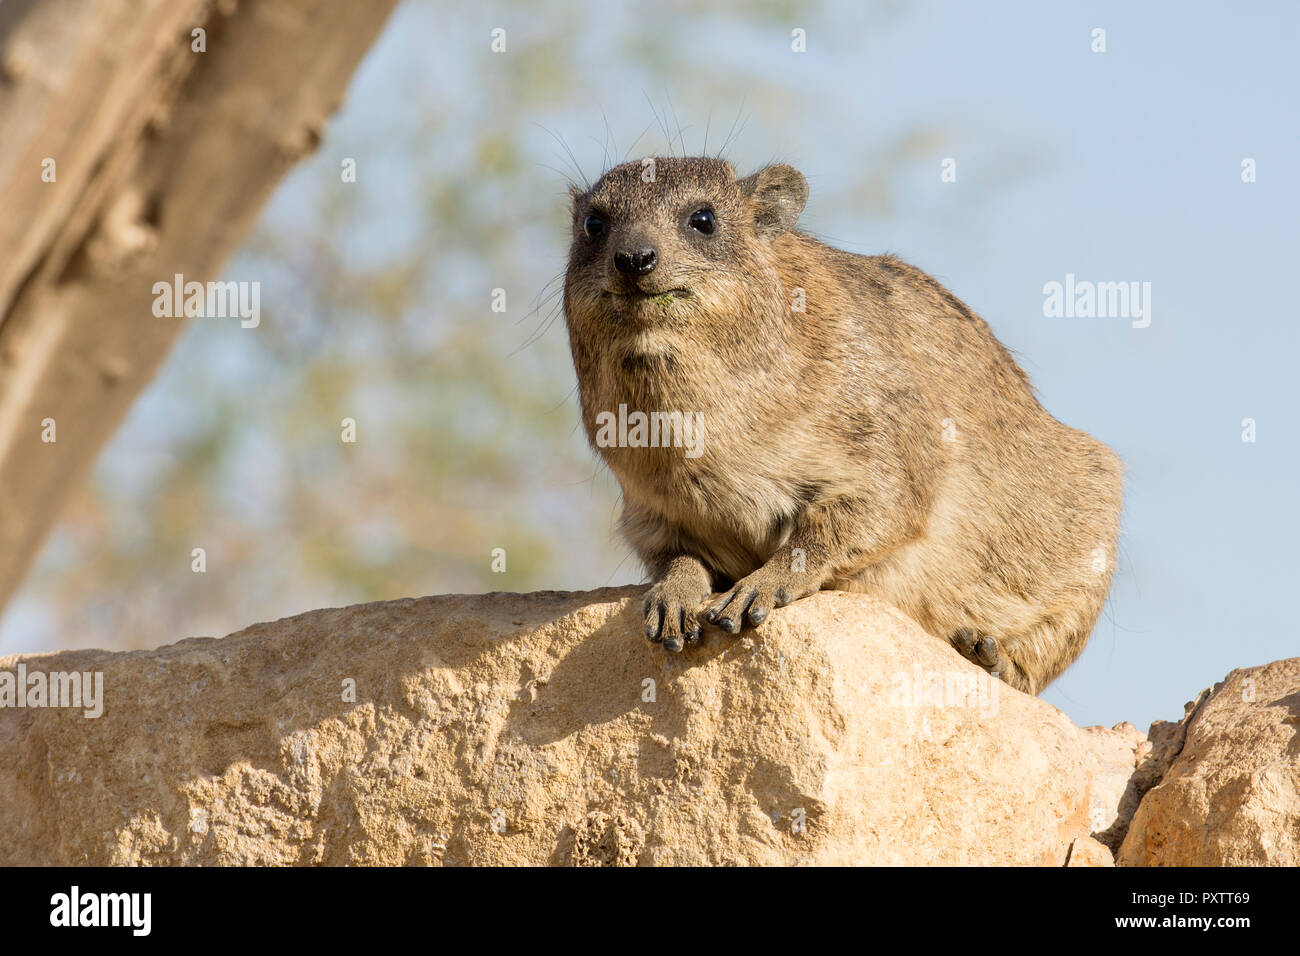 Hyrax animal sitting on rock with tree out to focus background Stock Photo